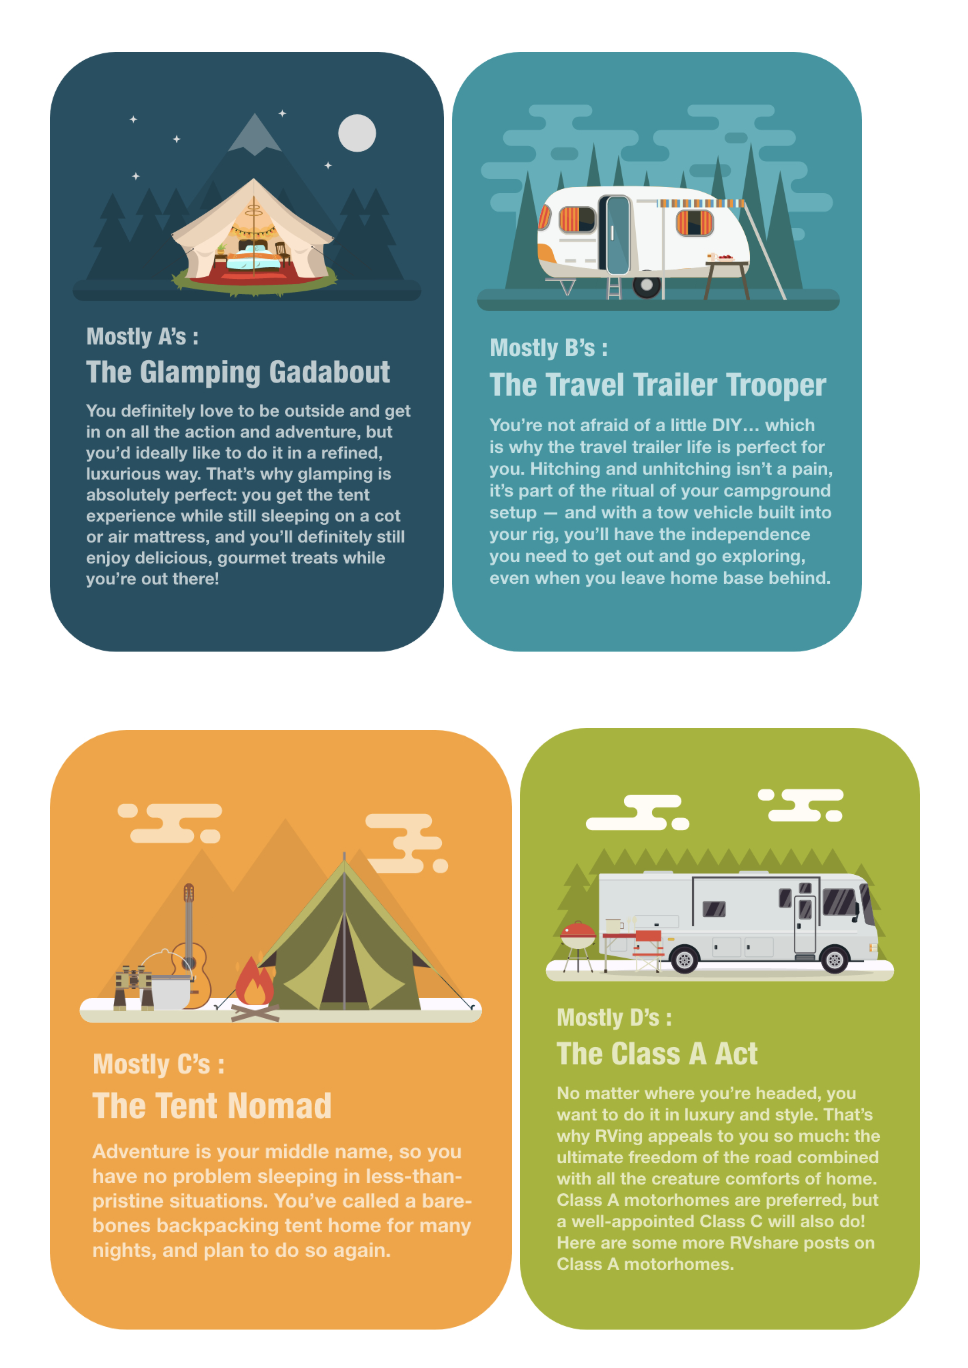 What Kind of Camper are You?